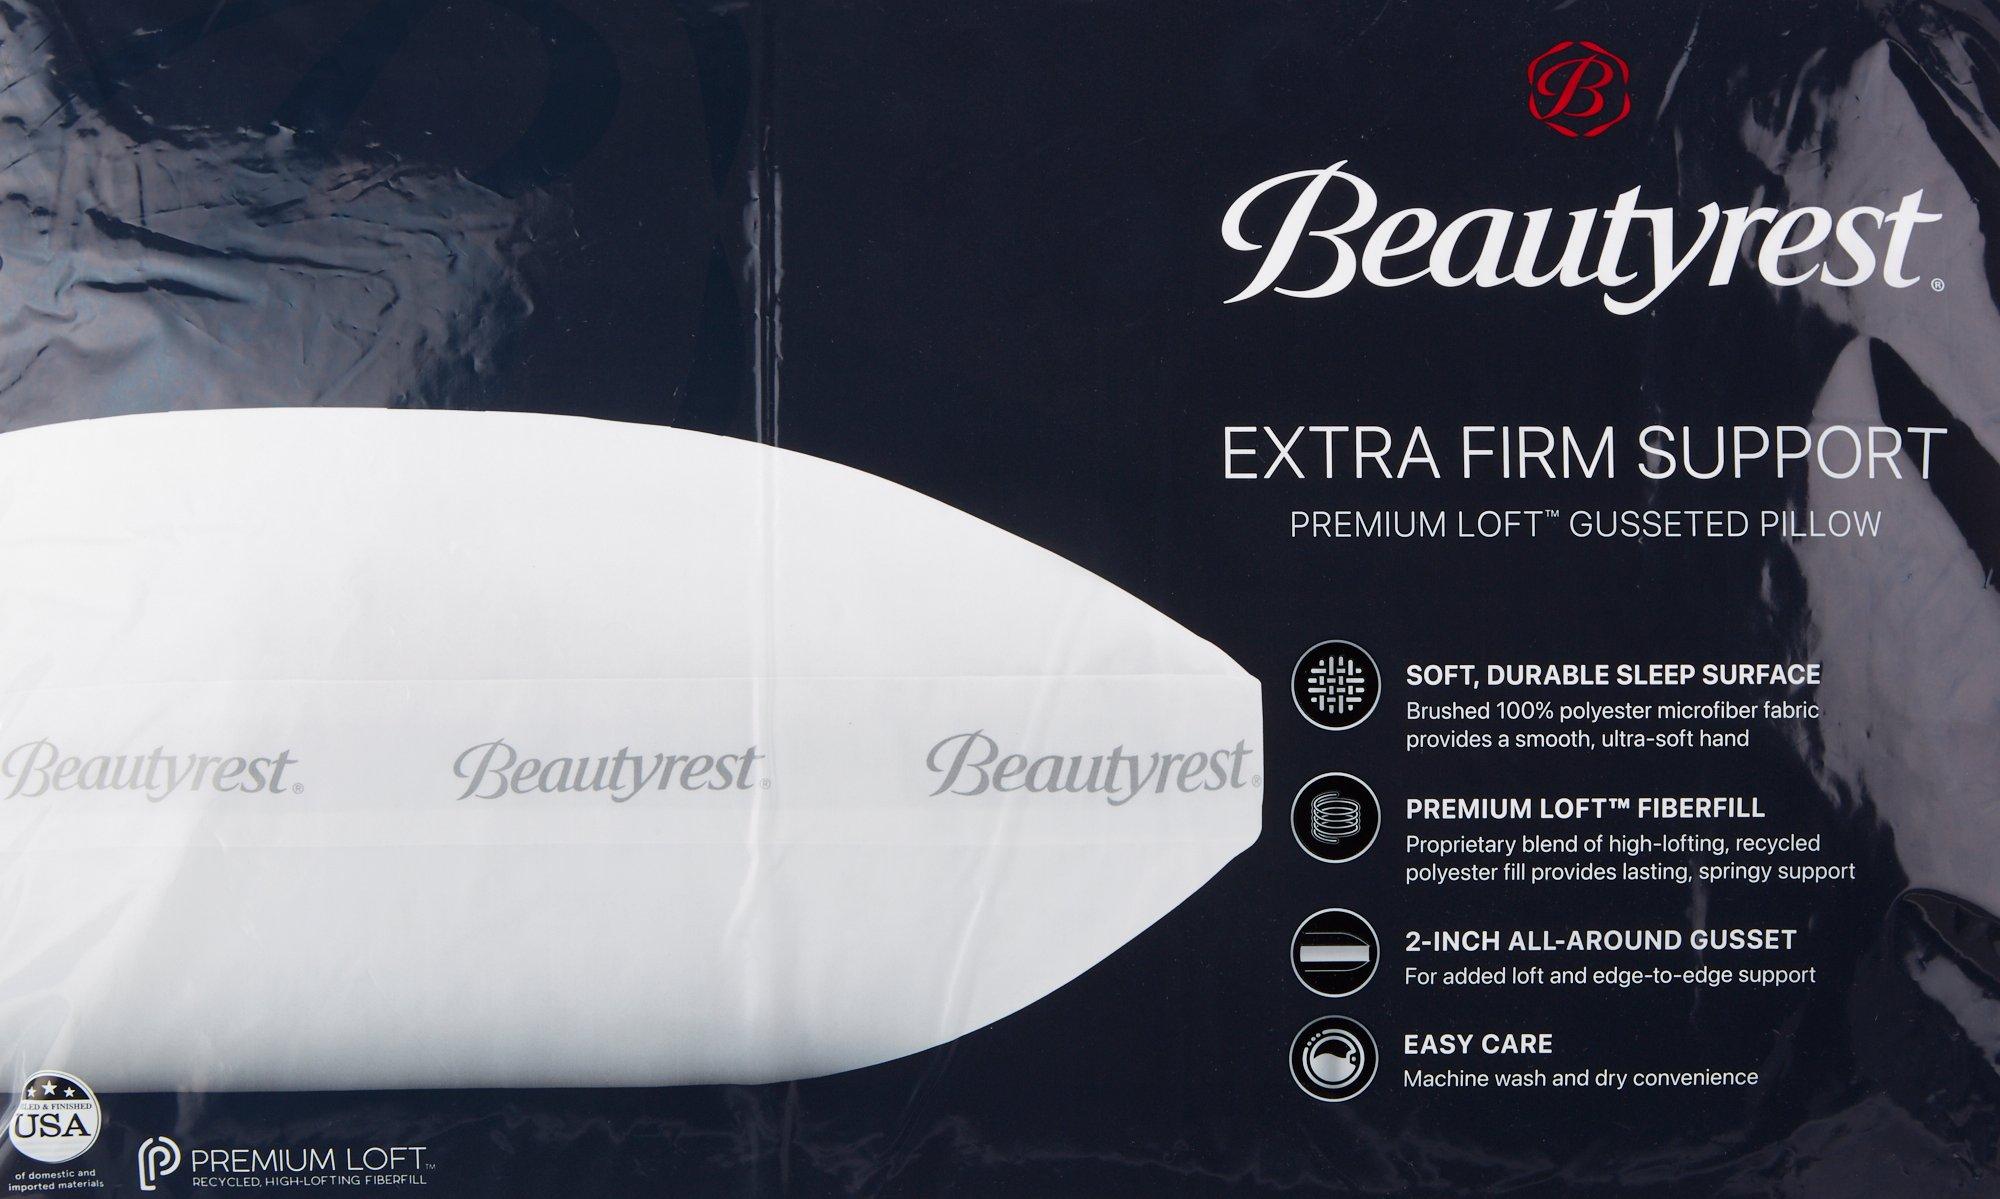 Beautyrest Extra Firm Support Gusseted Pillow Jumbo White